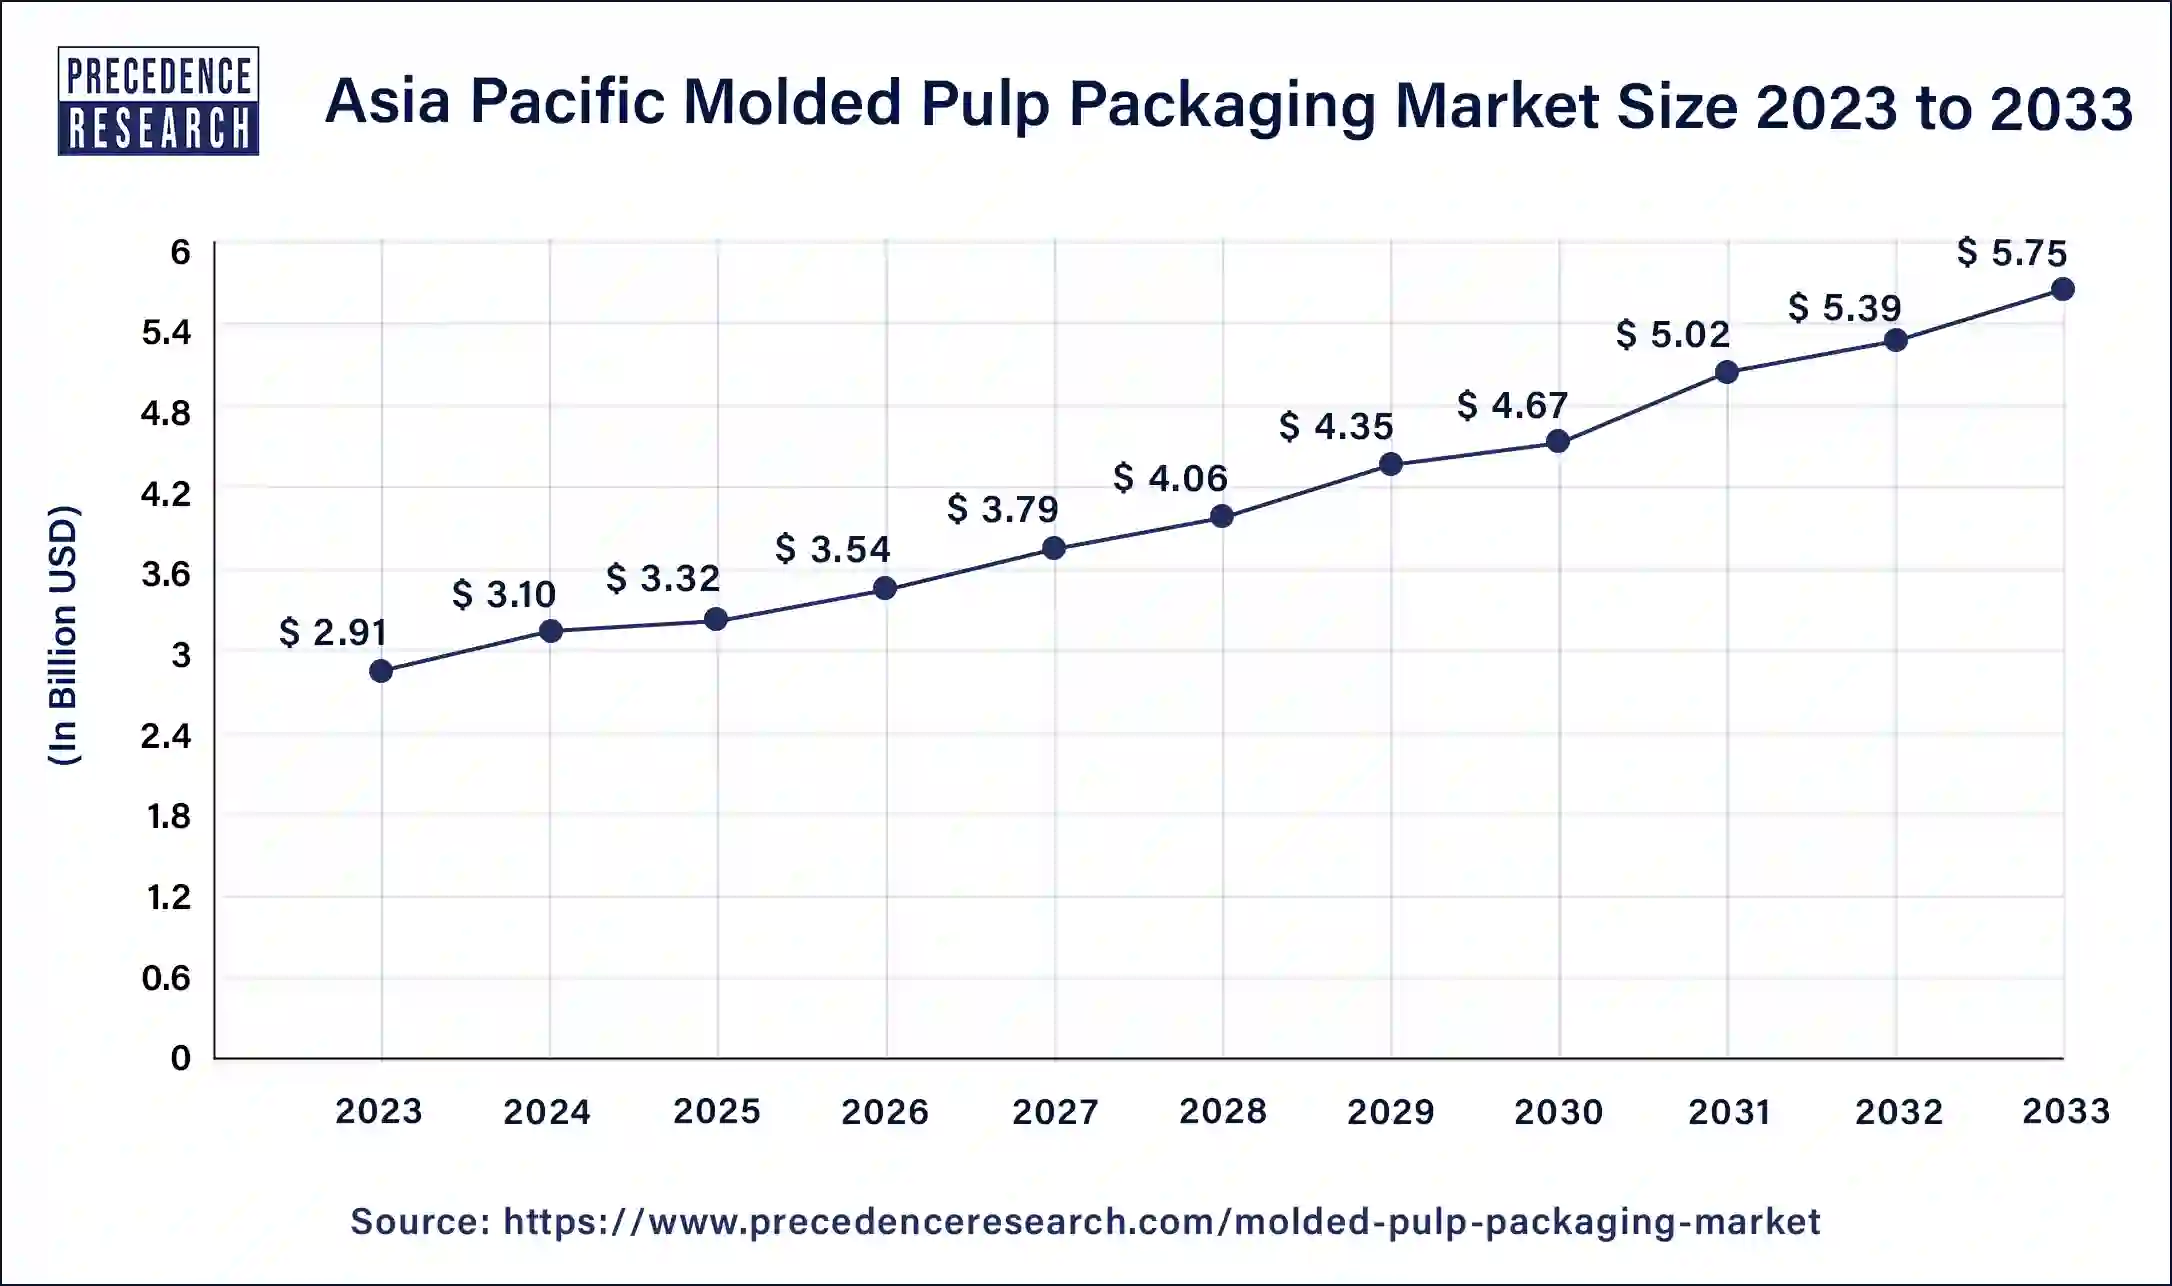 Asia Pacific Molded Pulp Packaging Market Size 2024 to 2033